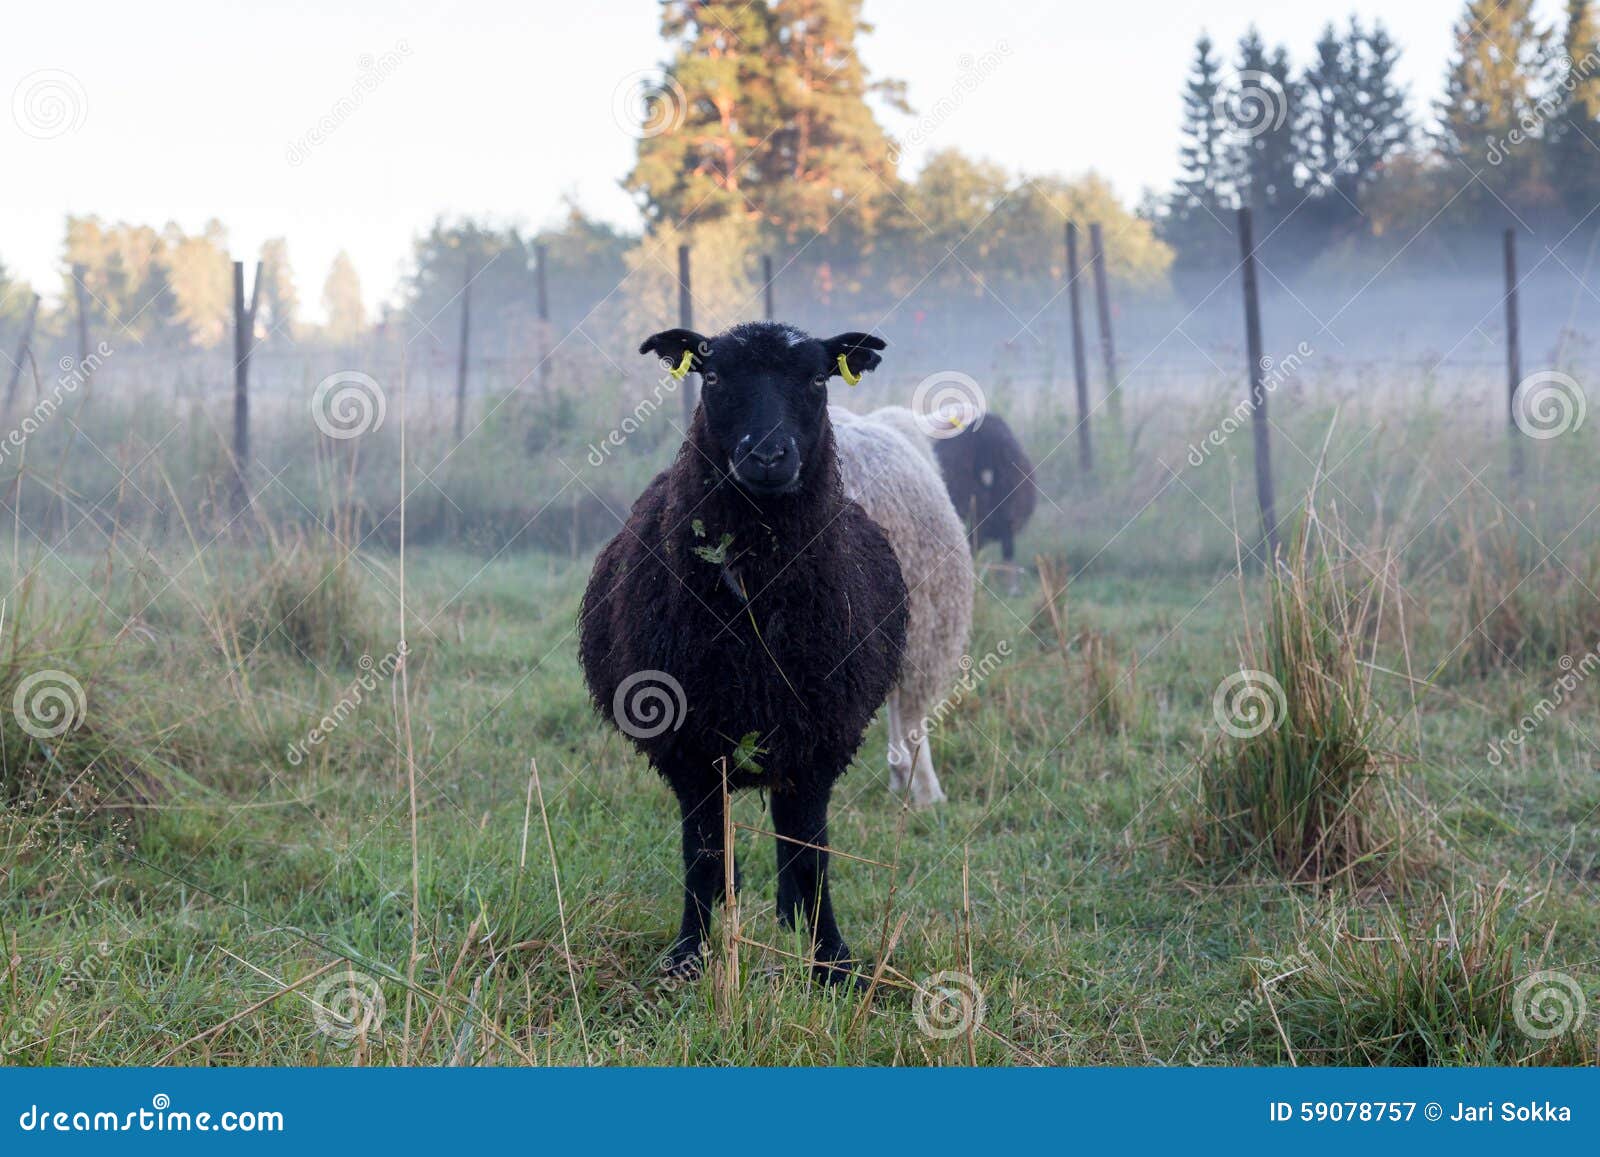 black sheep of the family example